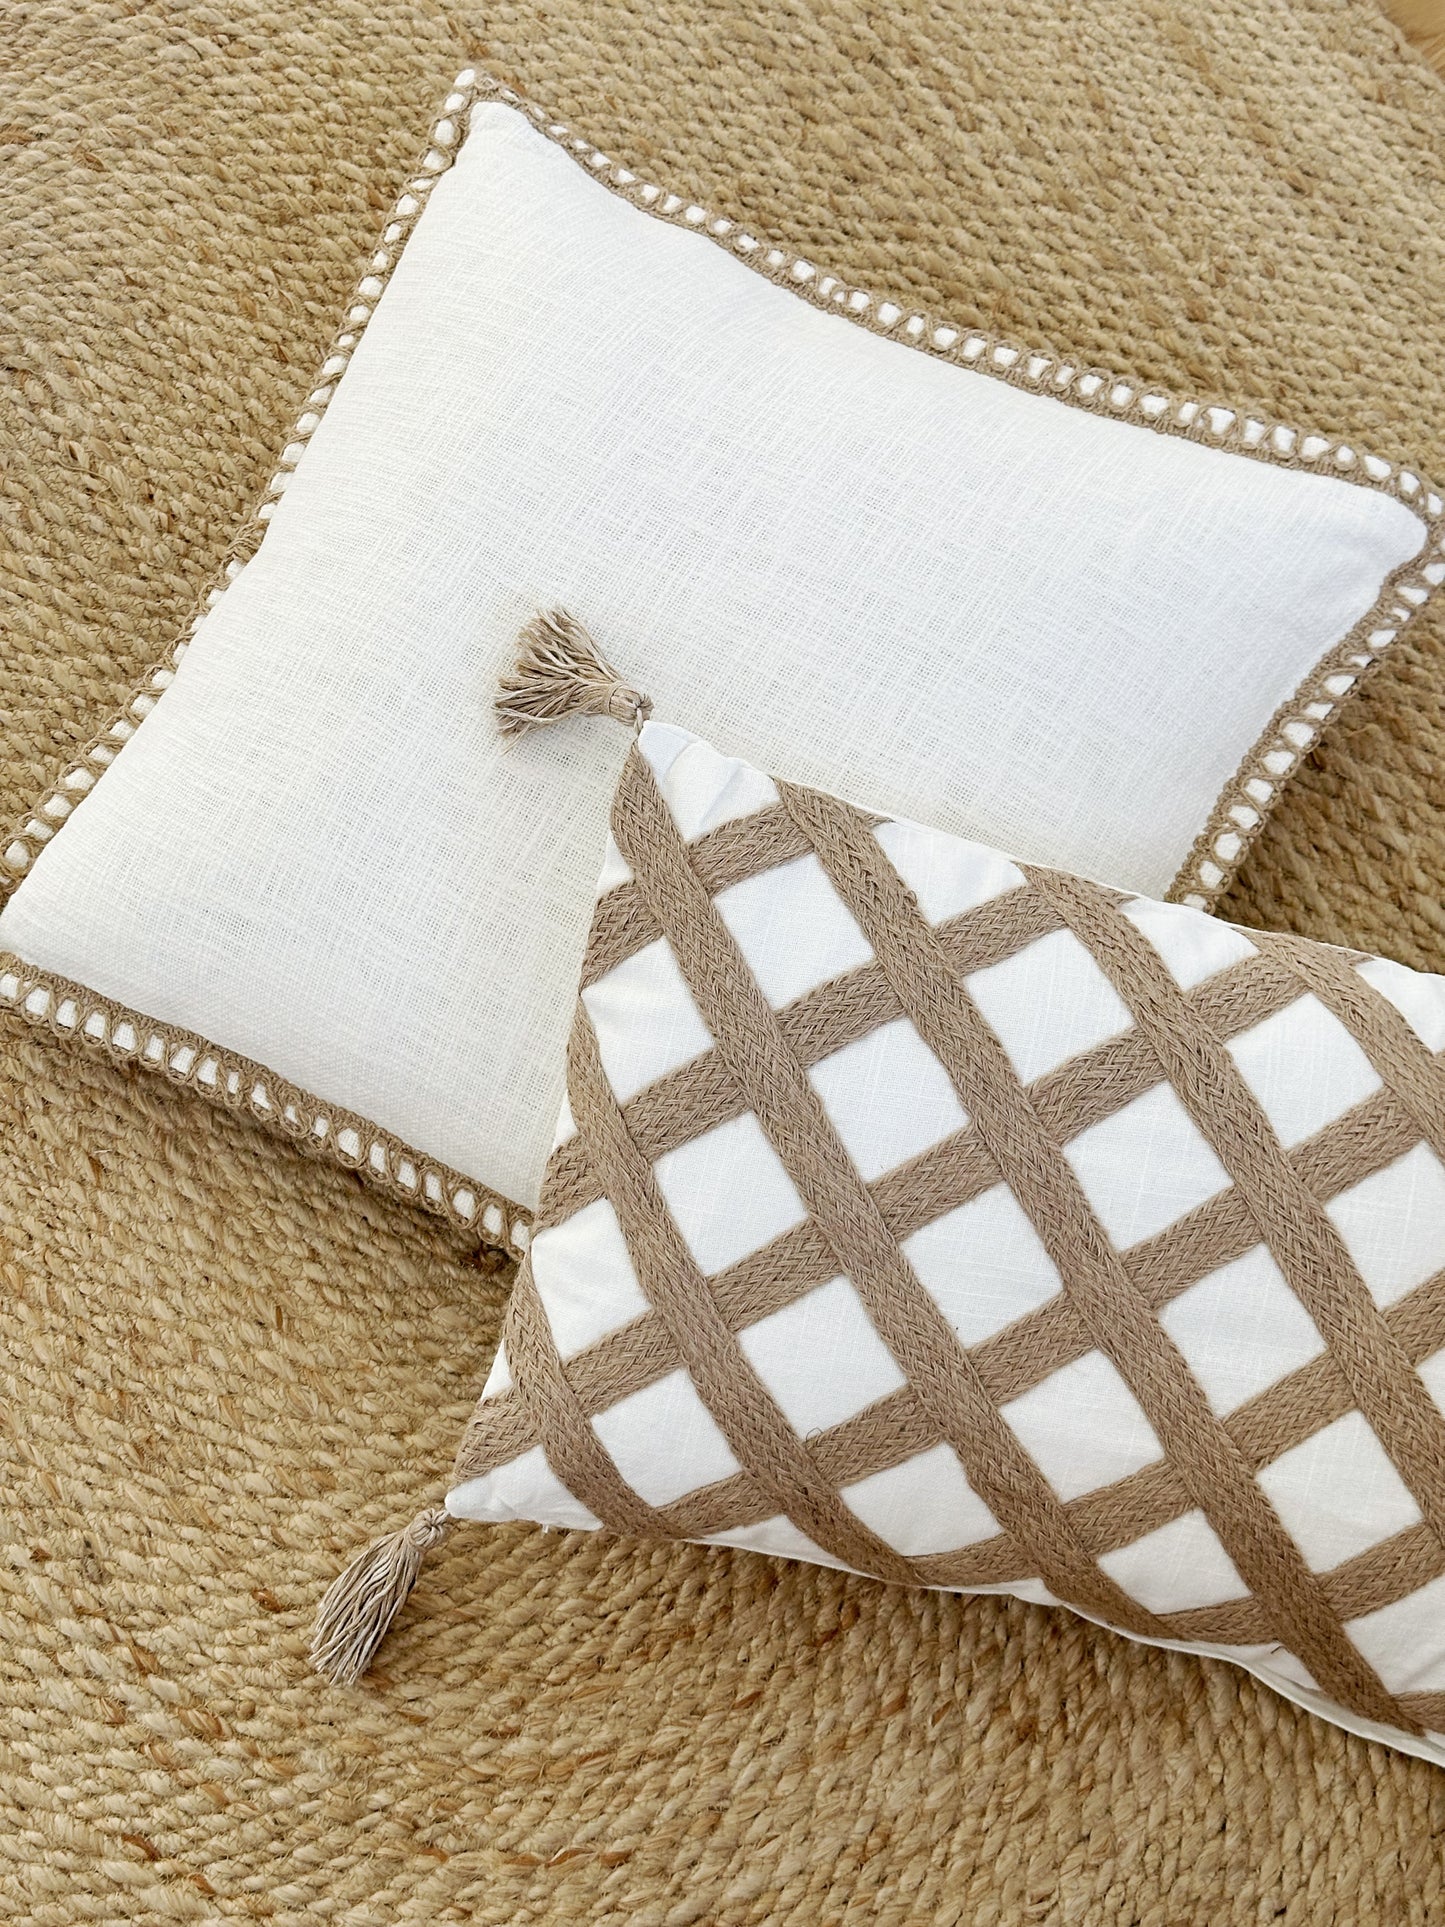 WOVEN CREAM COTTON PILLOW W/LOOP STITCHED FLANGE EDGE